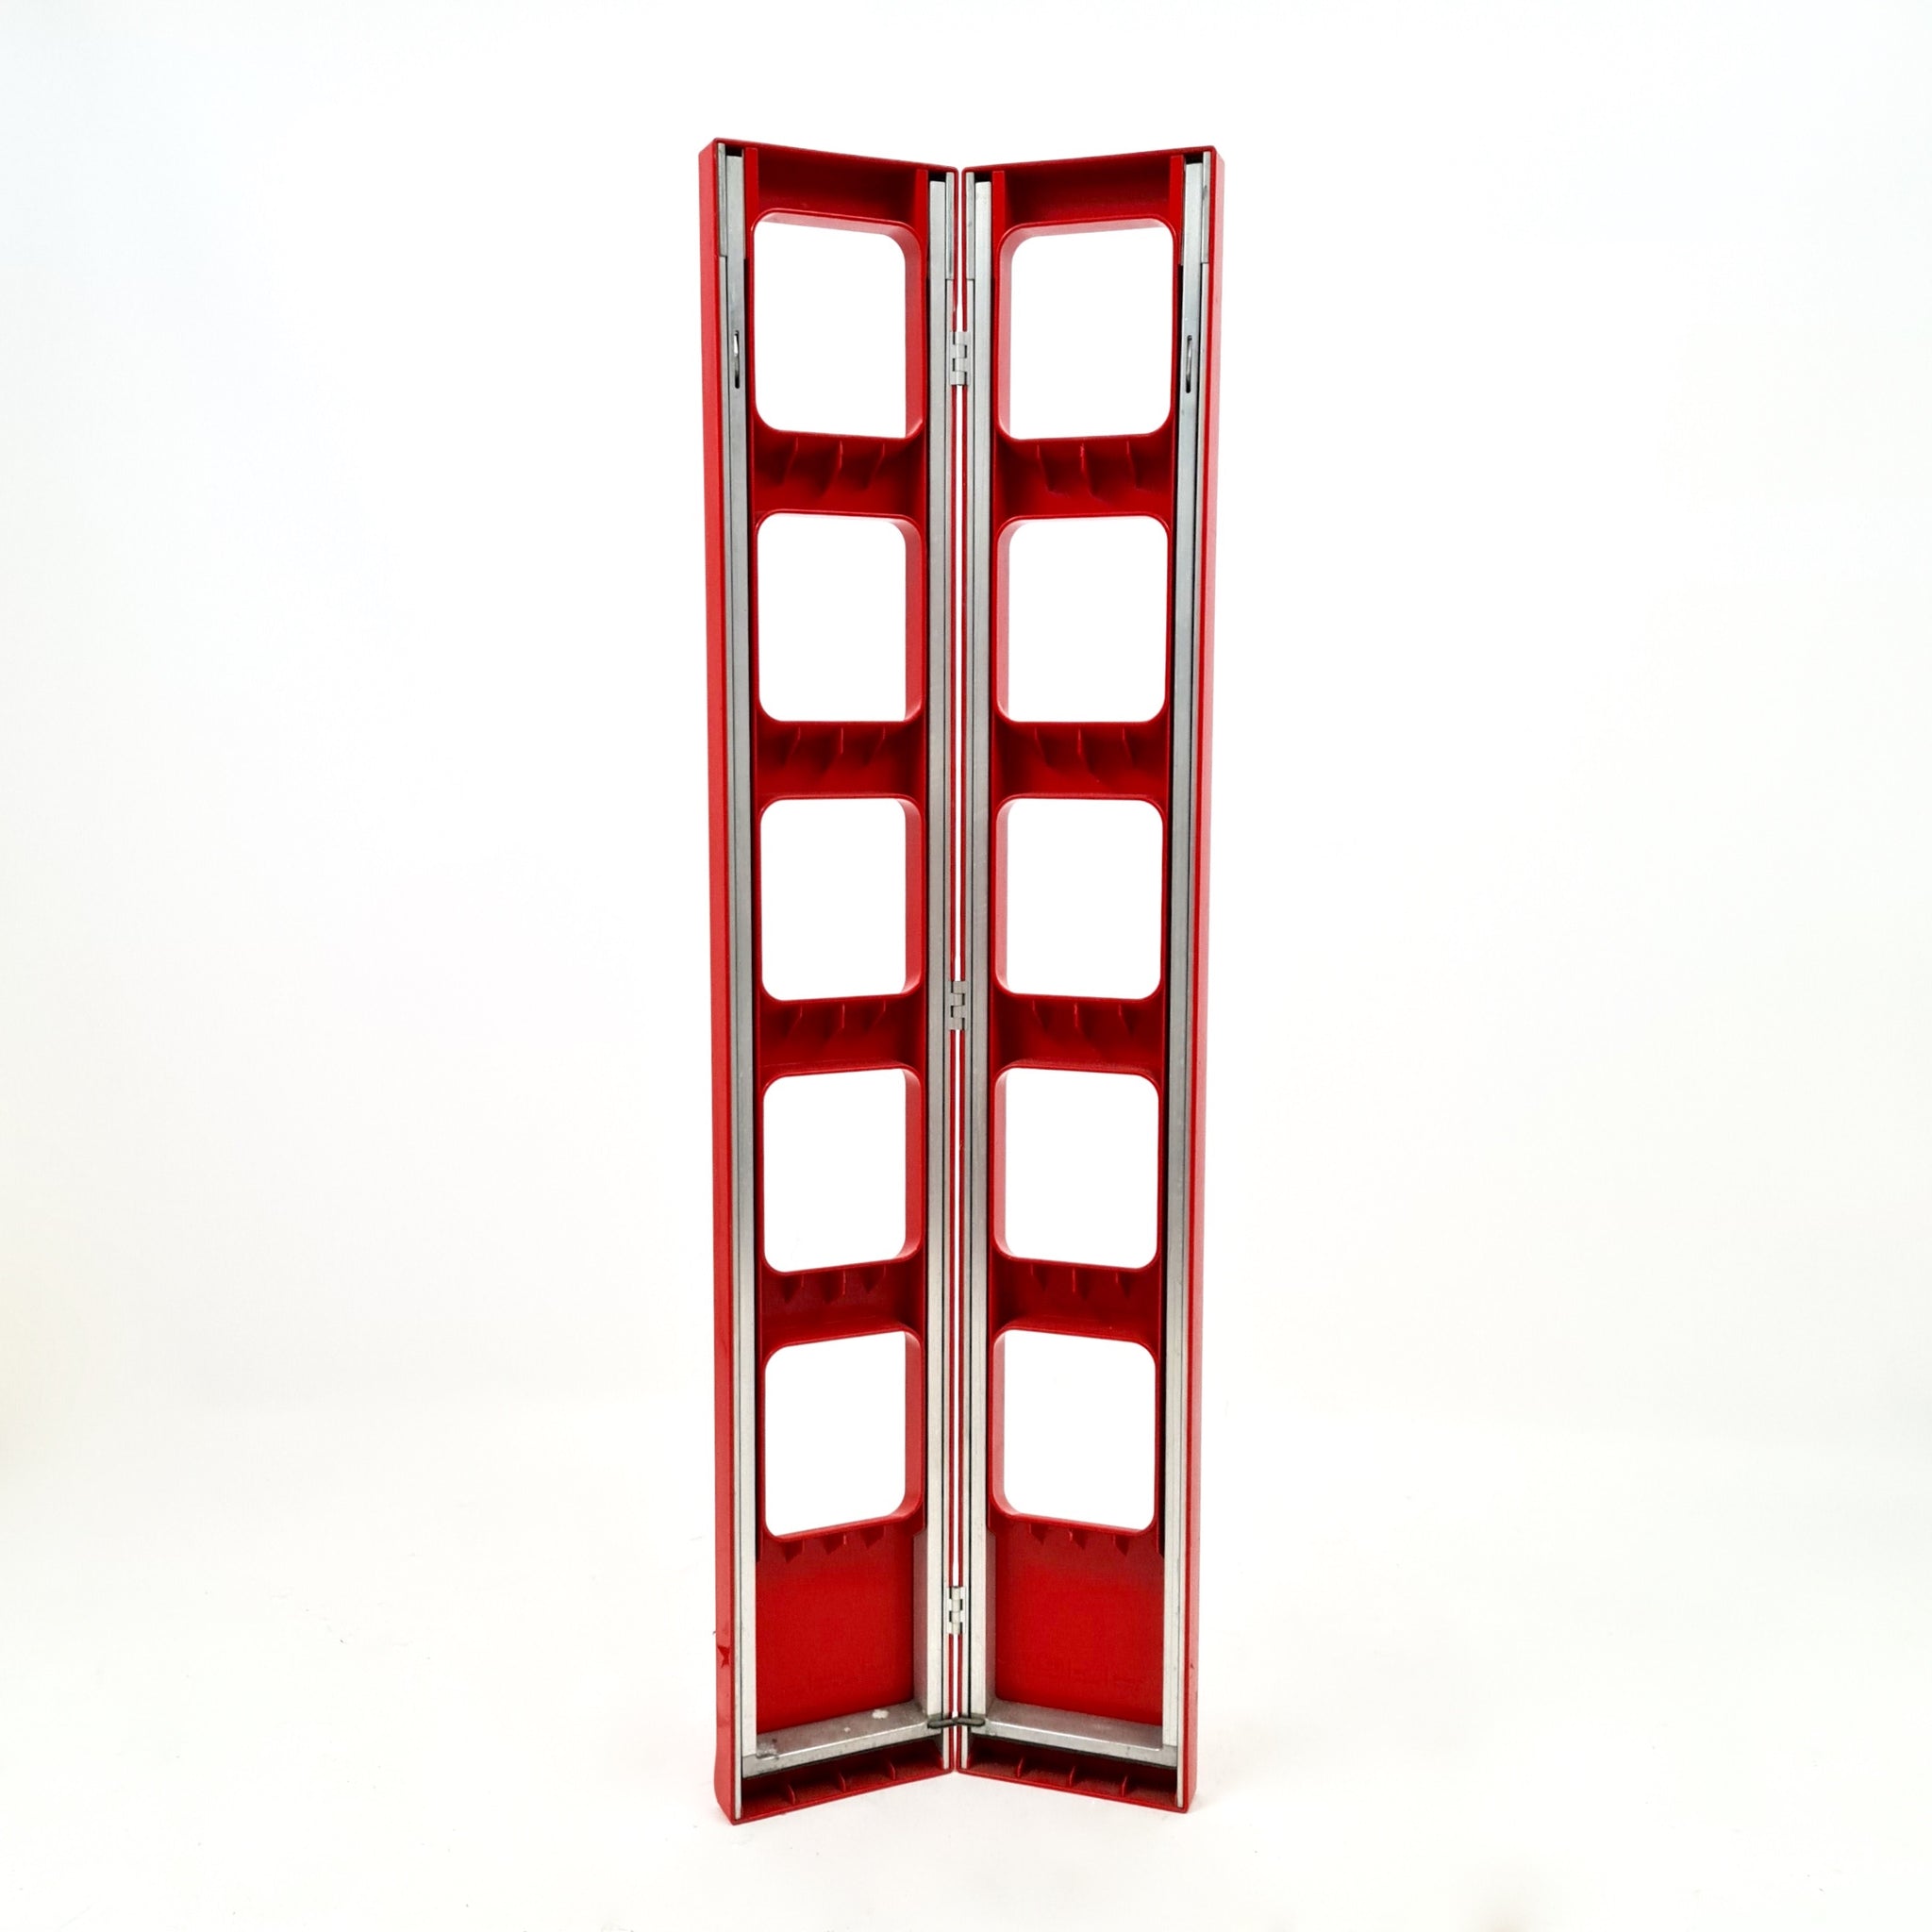 Vintage library ladder by Roberto Lucci and Paolo Orlandi  circa  1974 .